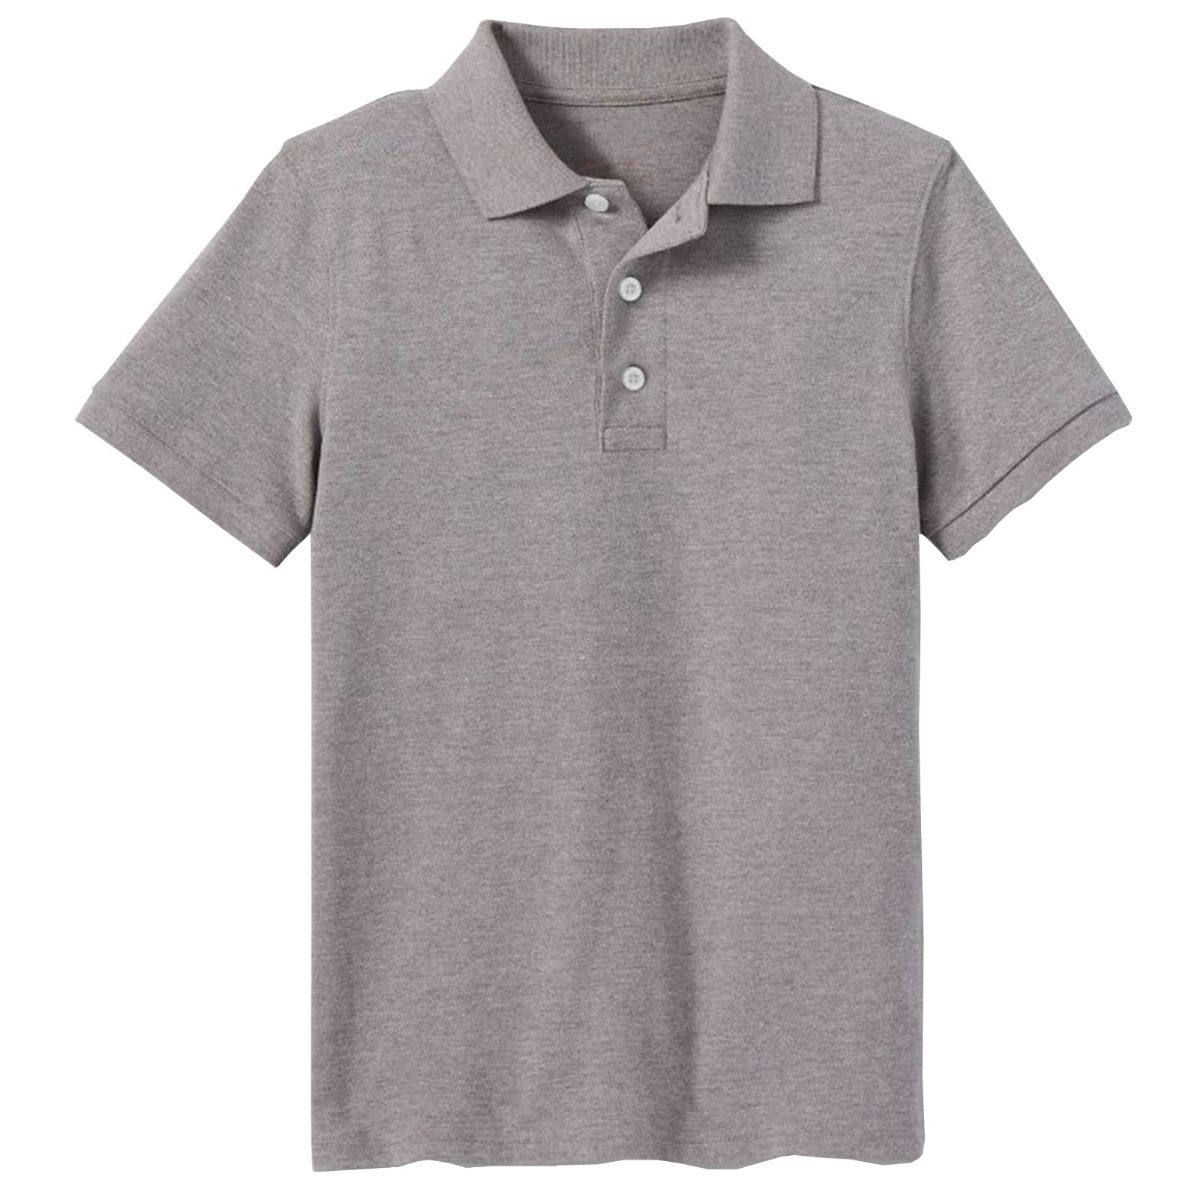 24 Pieces of Youth Polo Shirt Heather Grey In Size xs